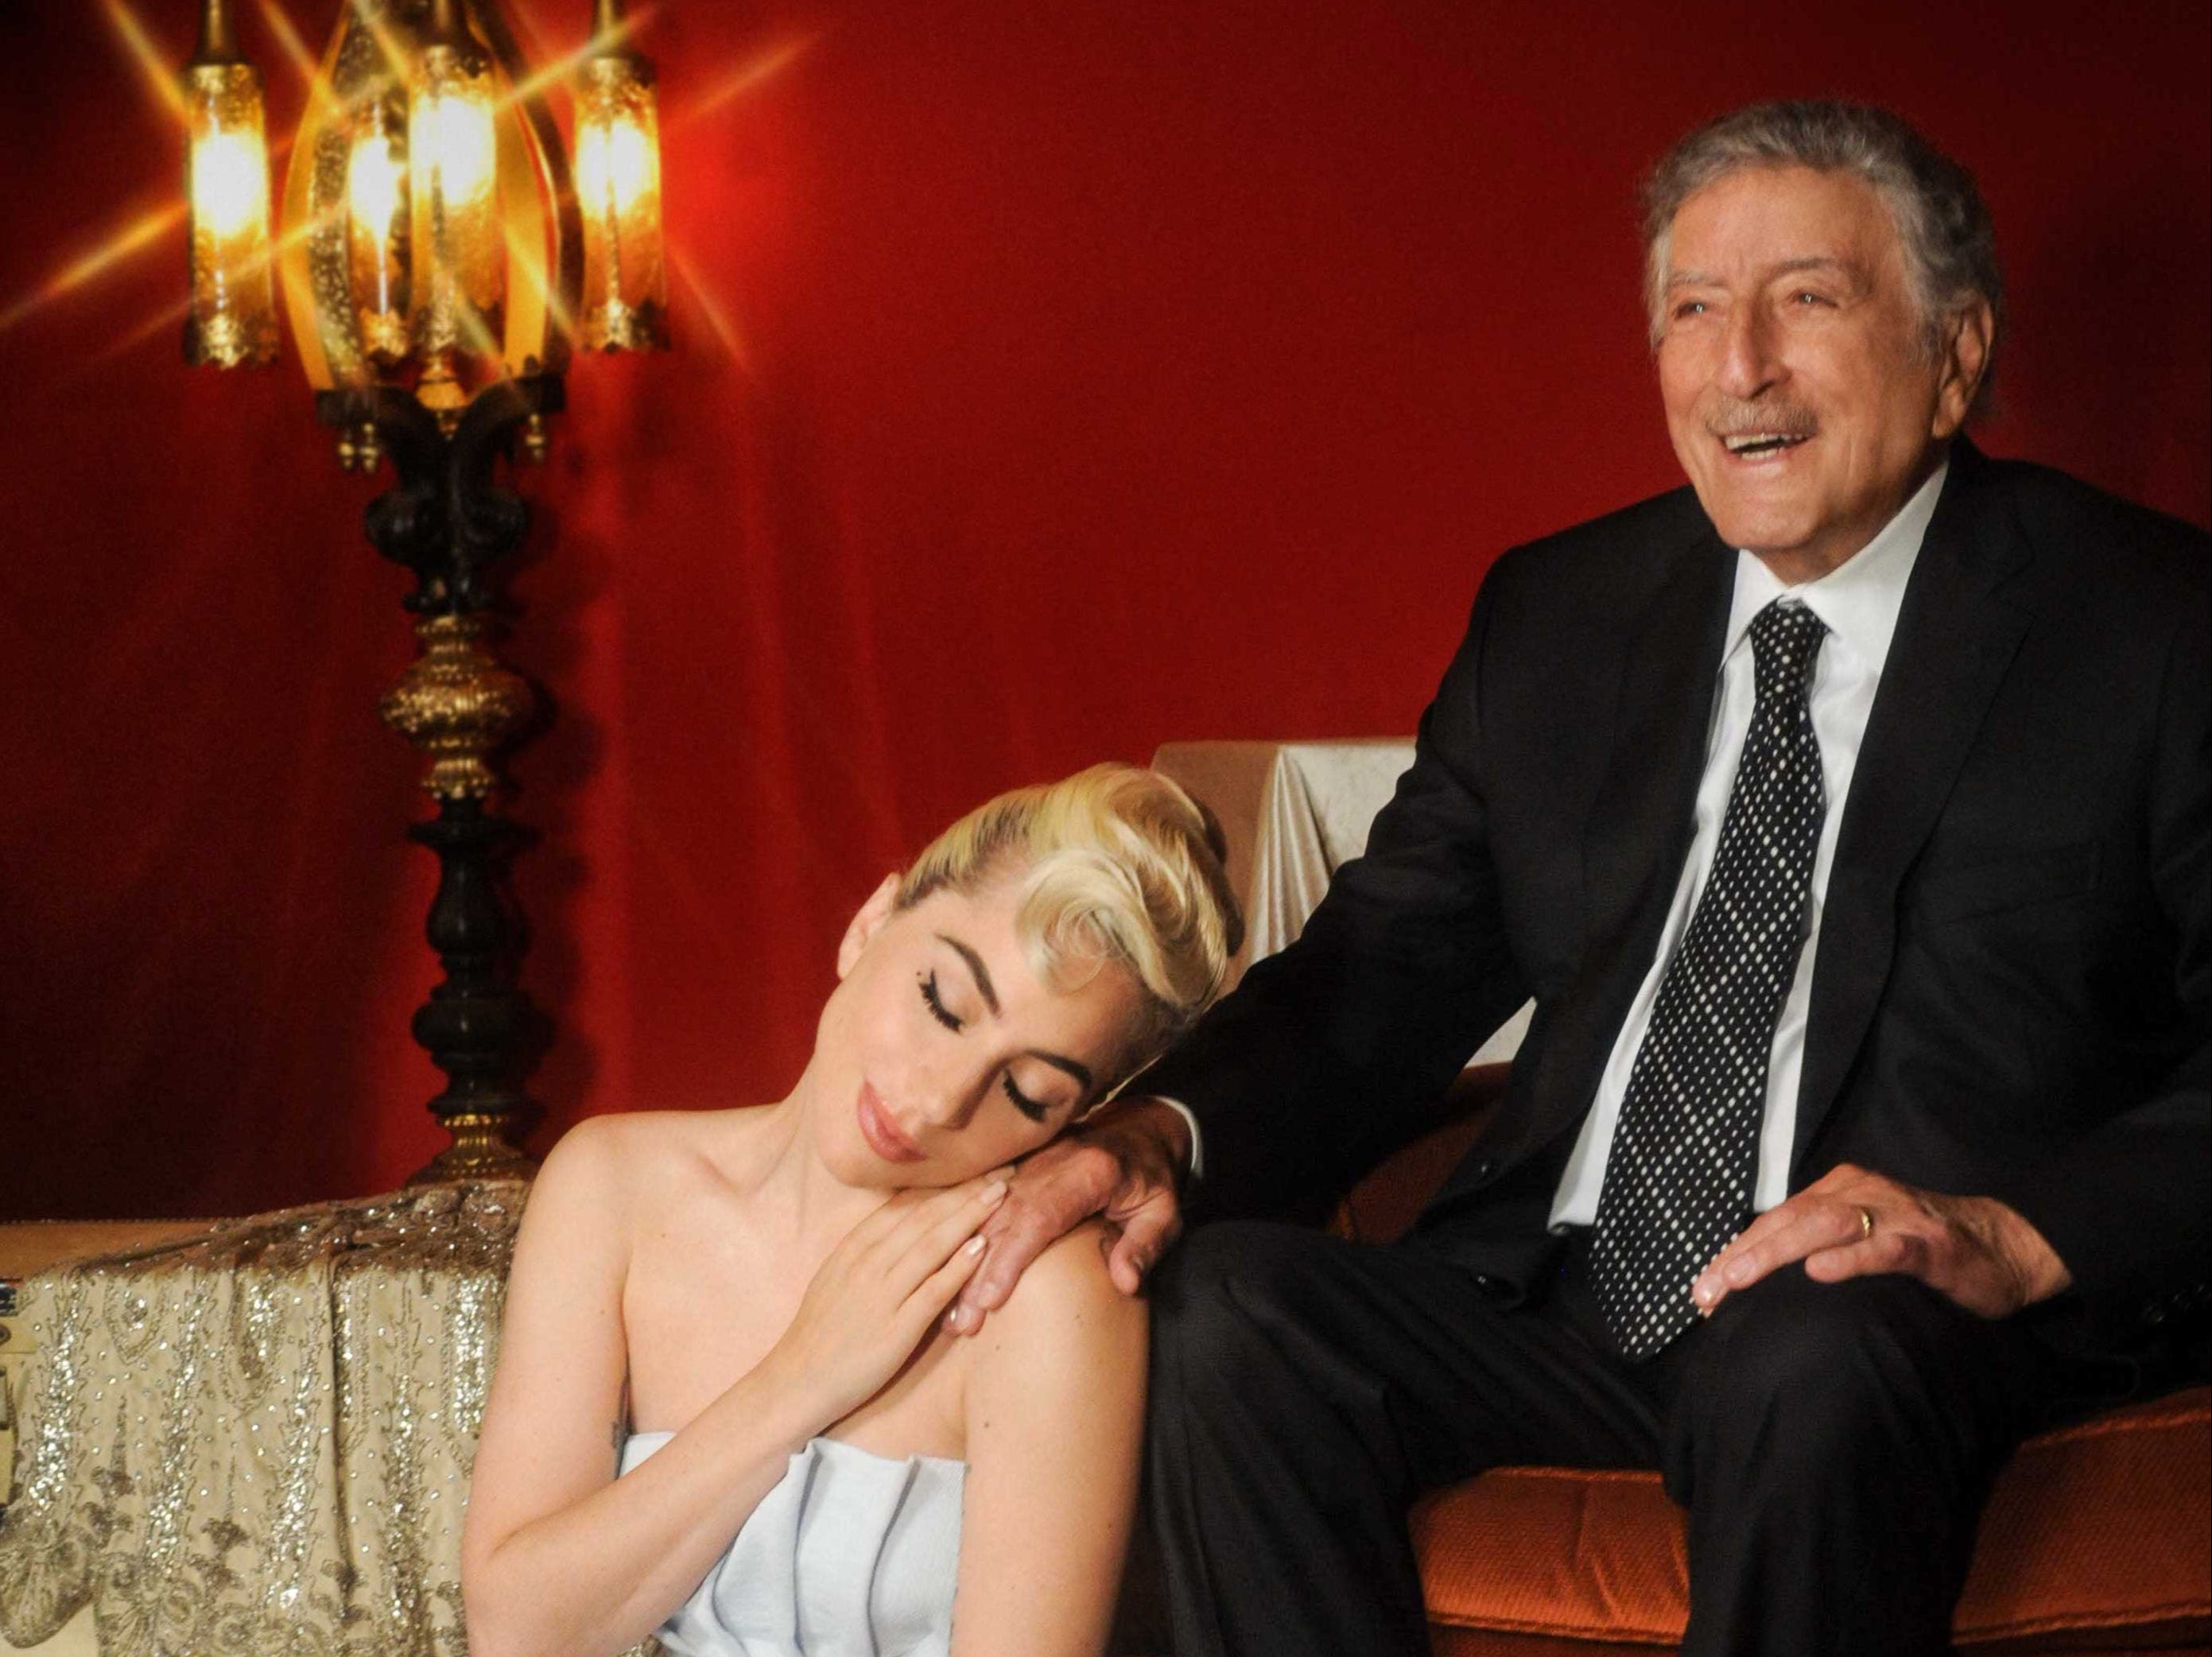 Lady Gaga and Tony Bennett defy the odds on ‘Love for Sale'